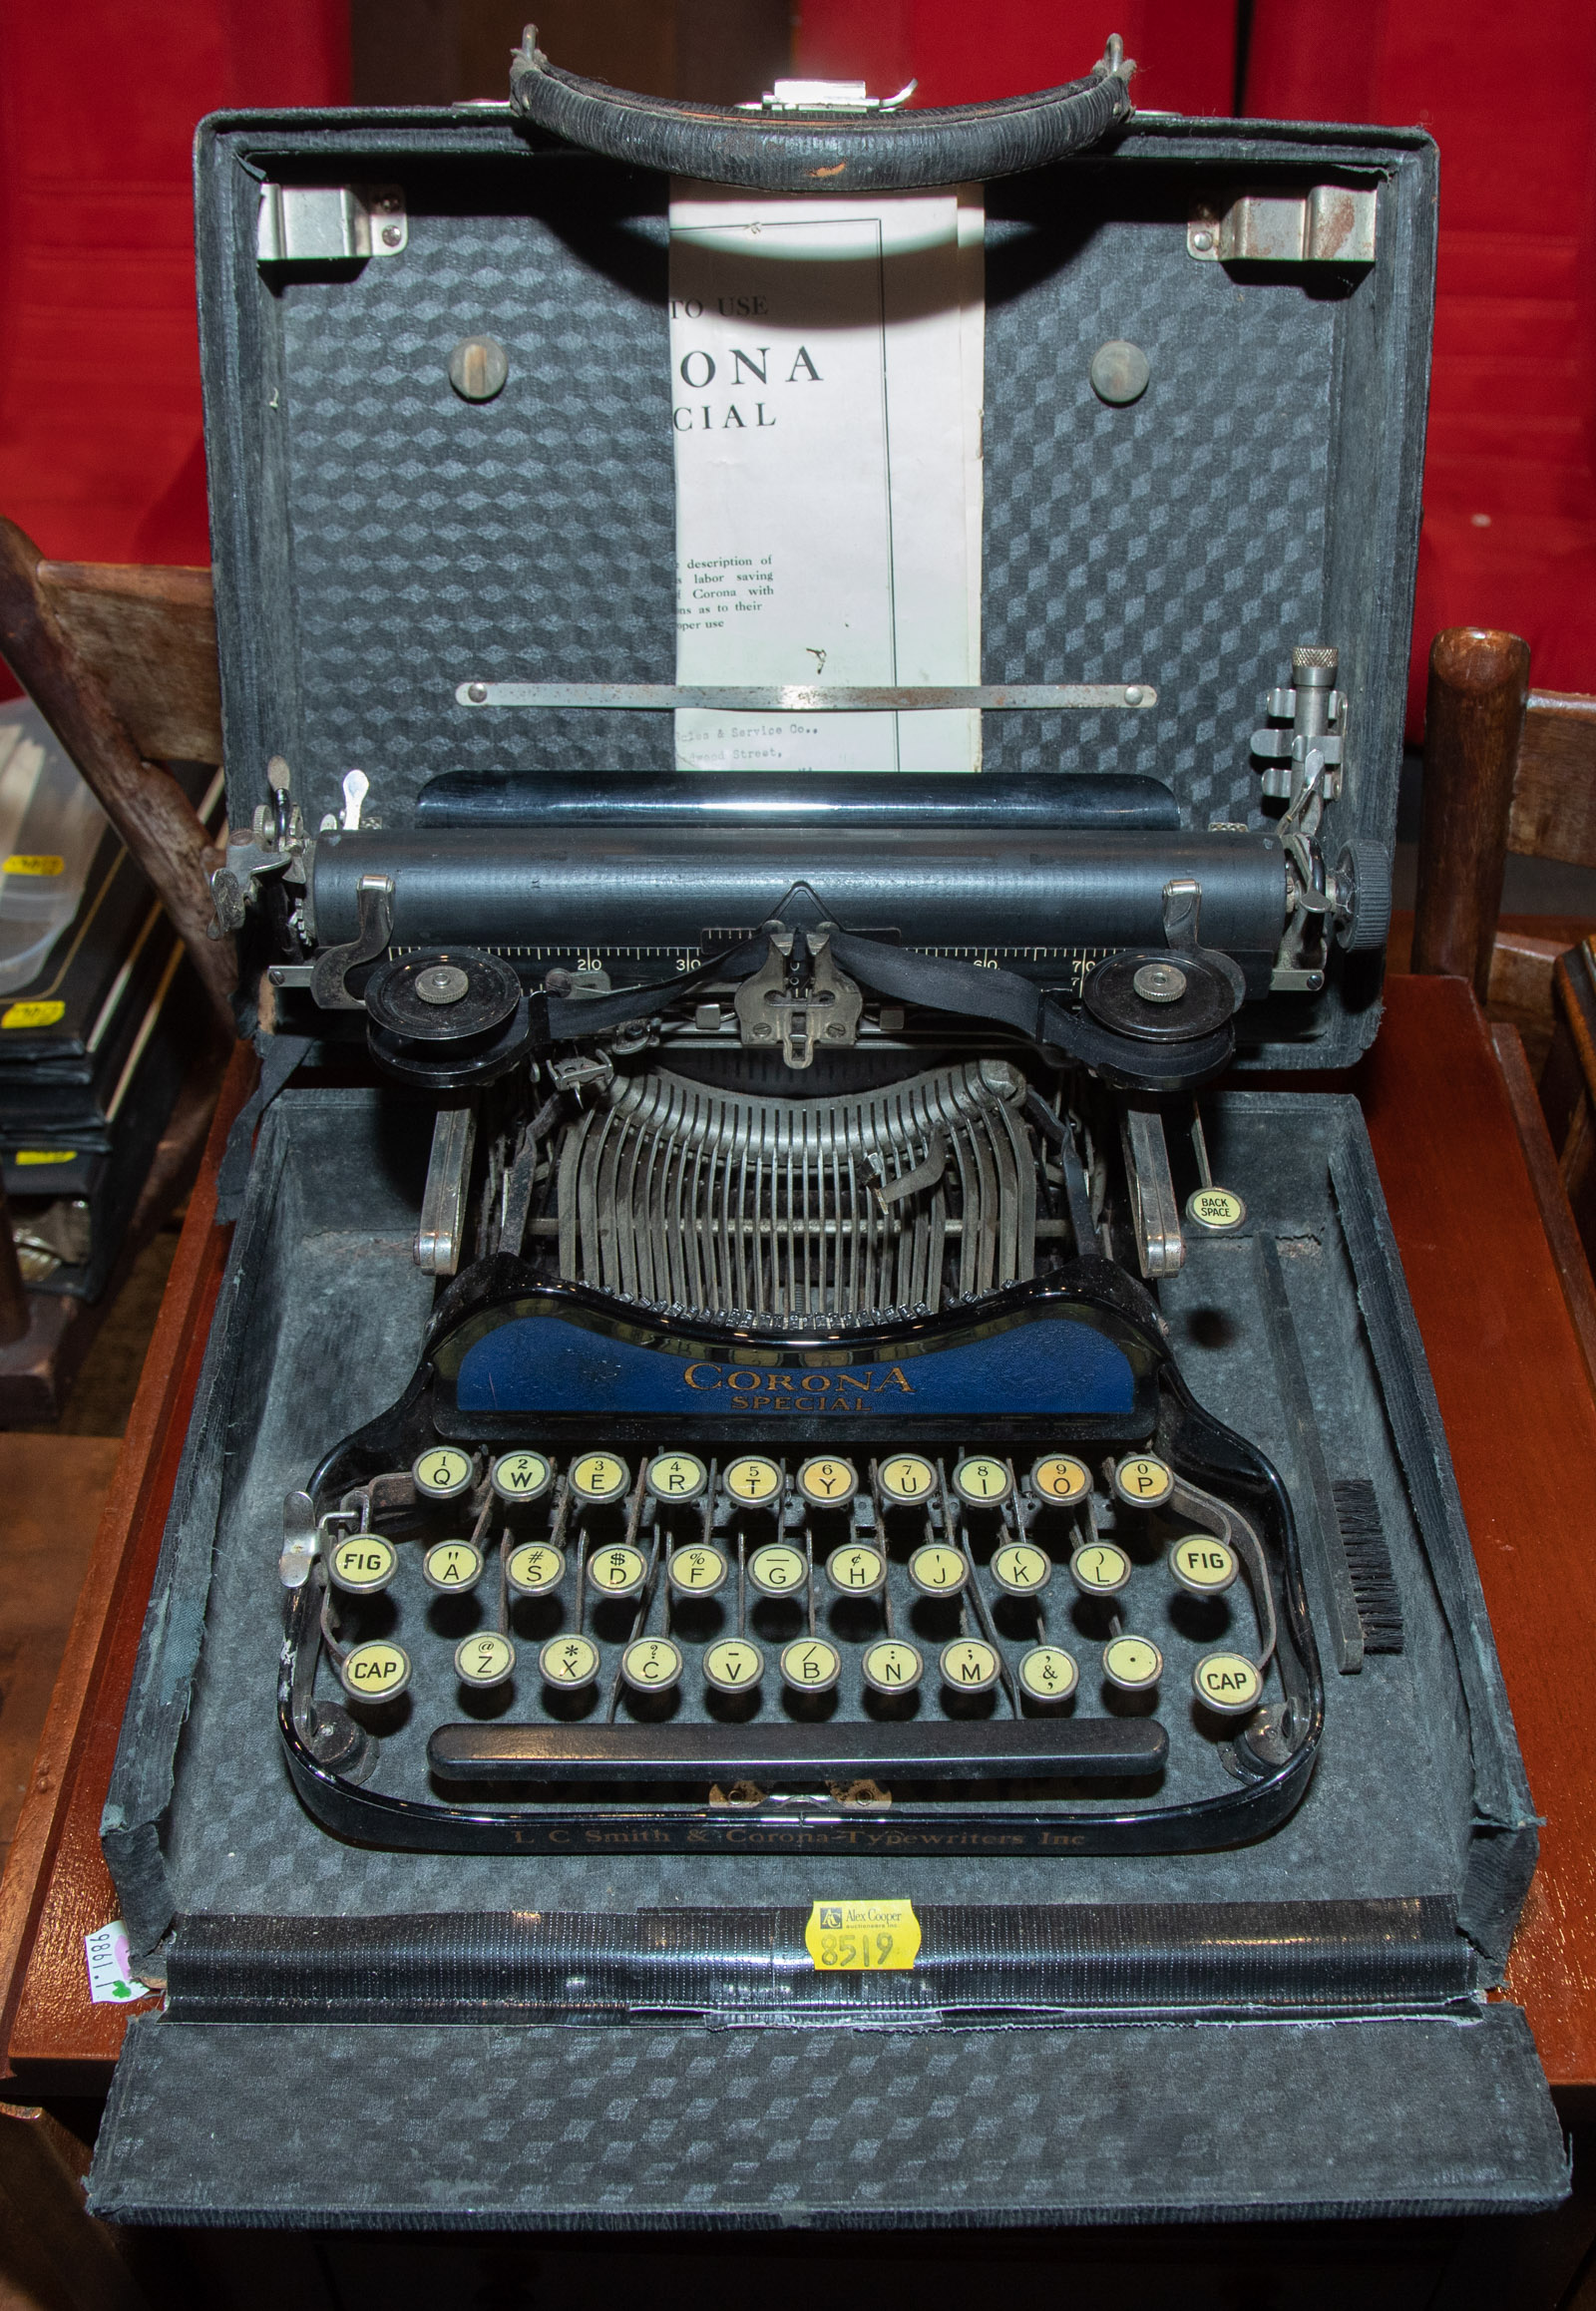 CORONA SPECIAL PORTABLE TYPEWRITER WITH